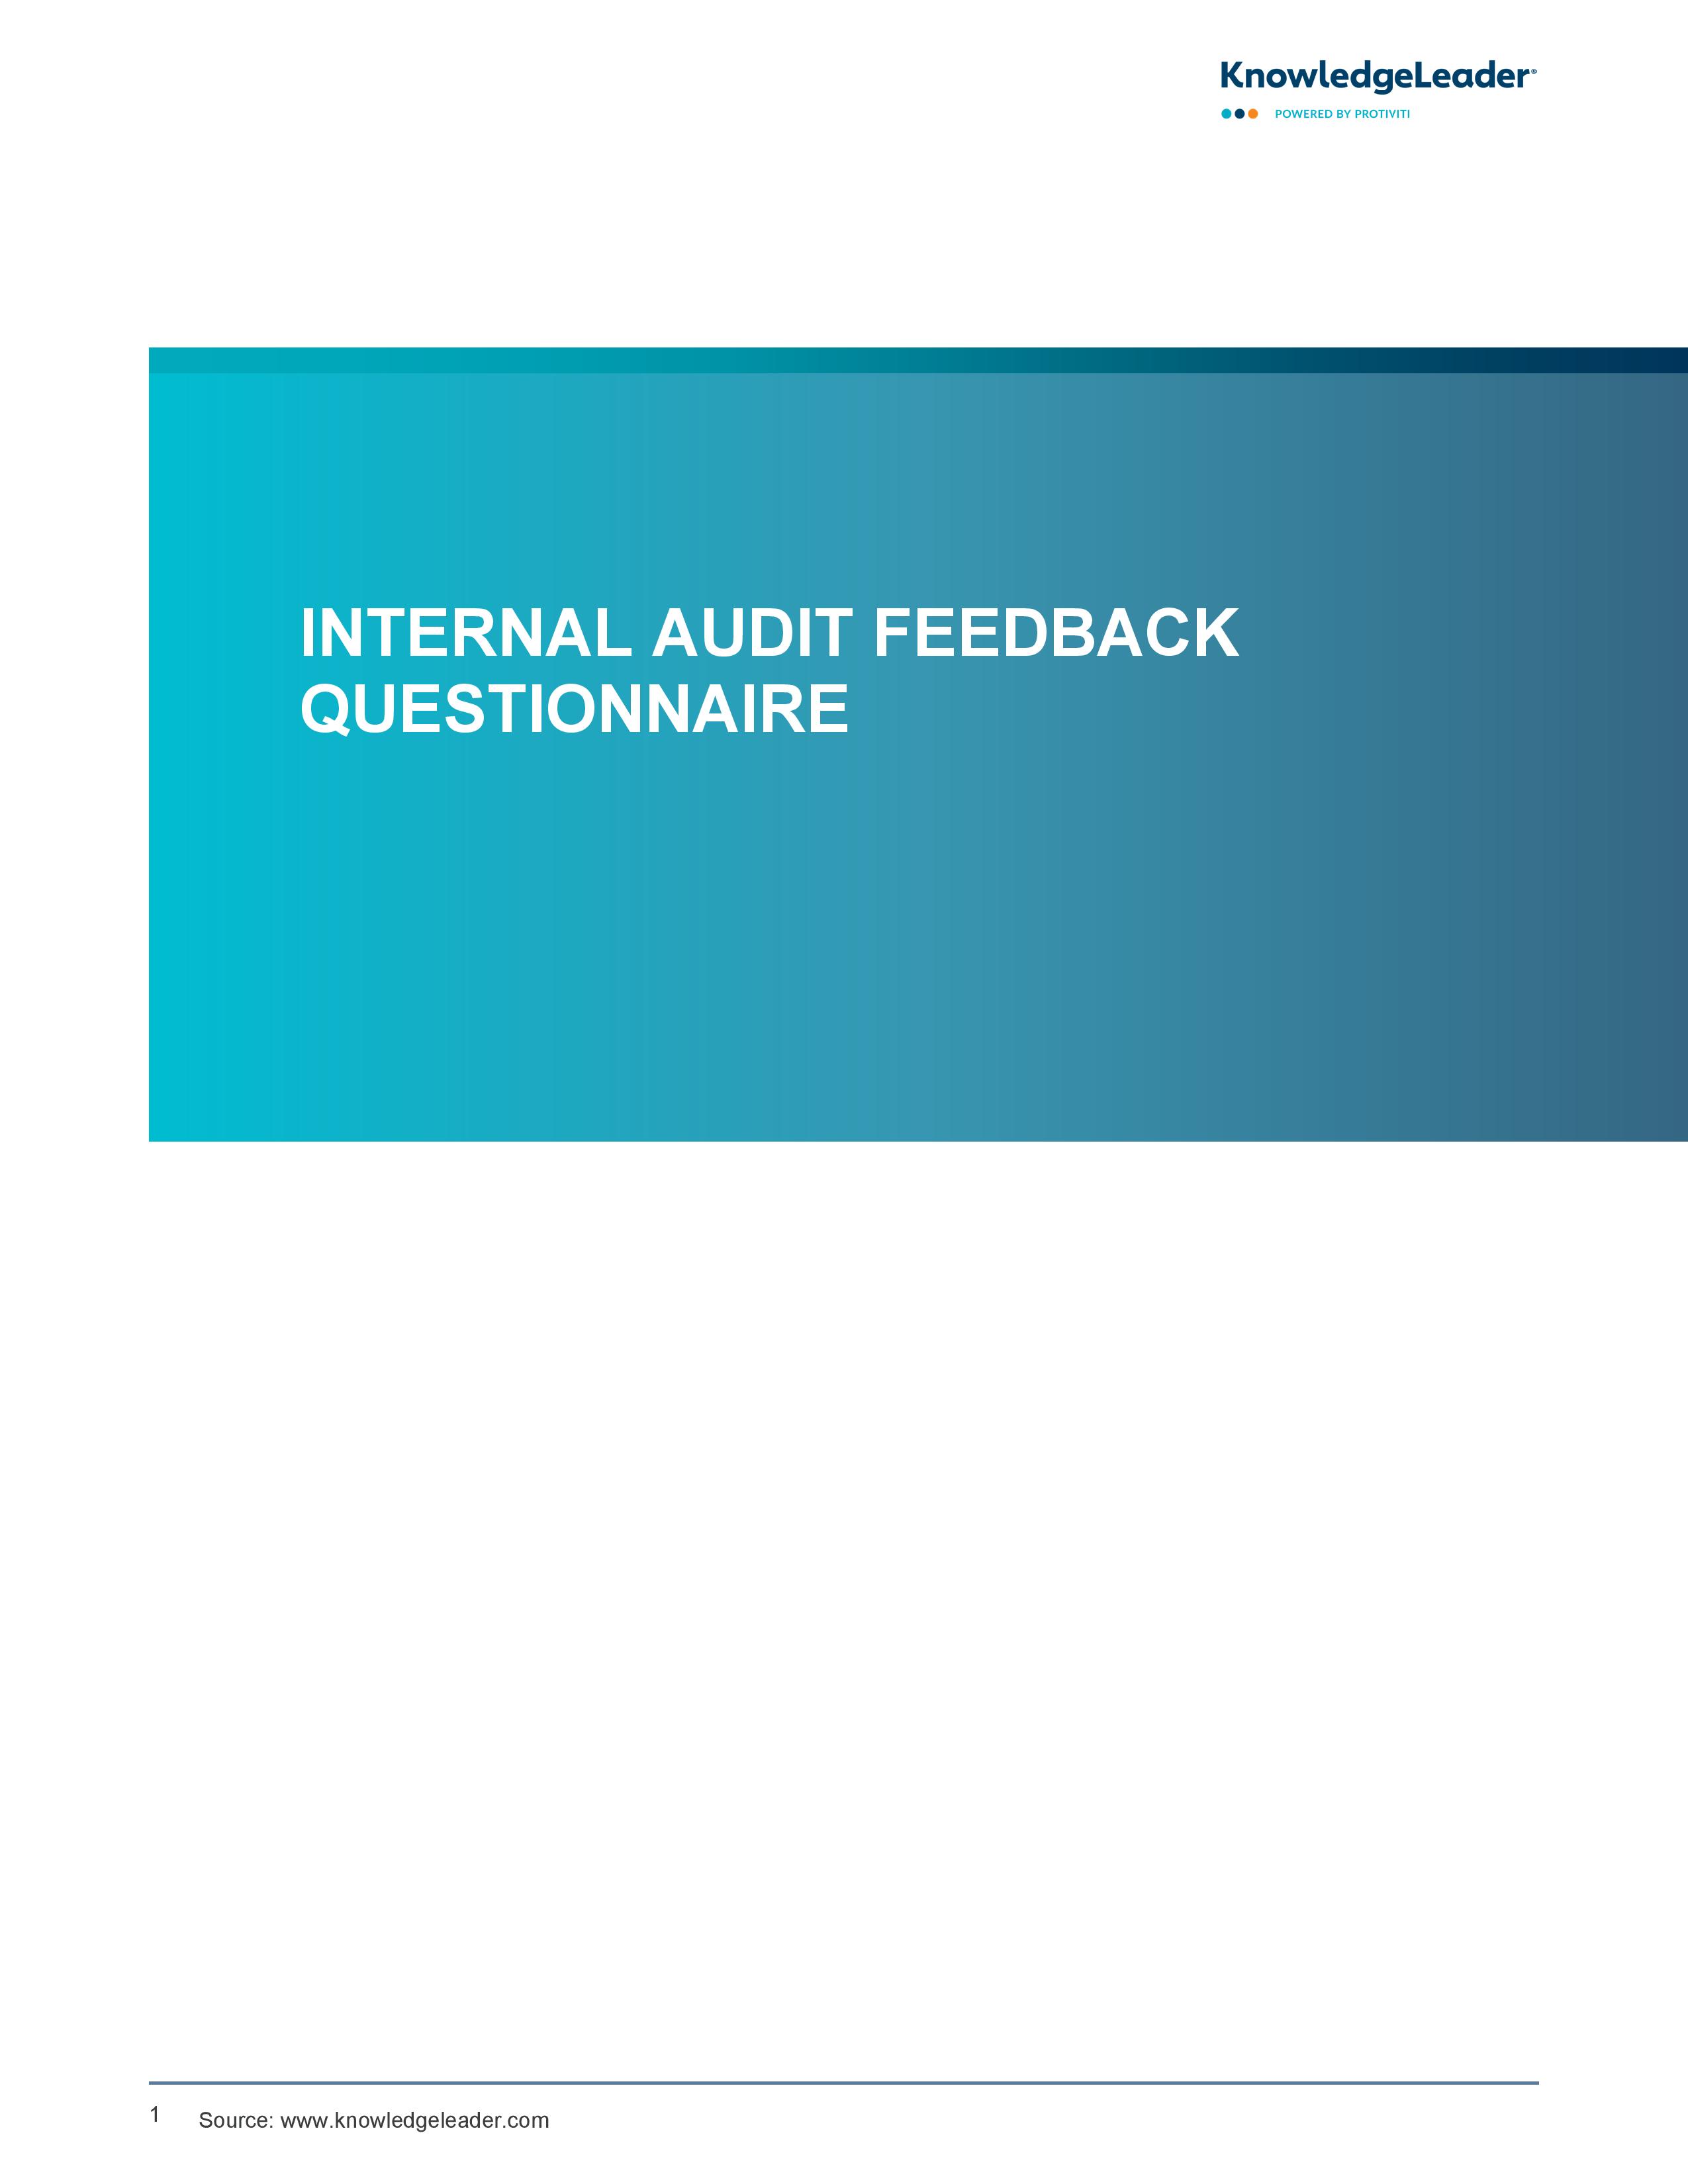 Screenshot of the First Page of Internal Audit Feedback Questionnaire